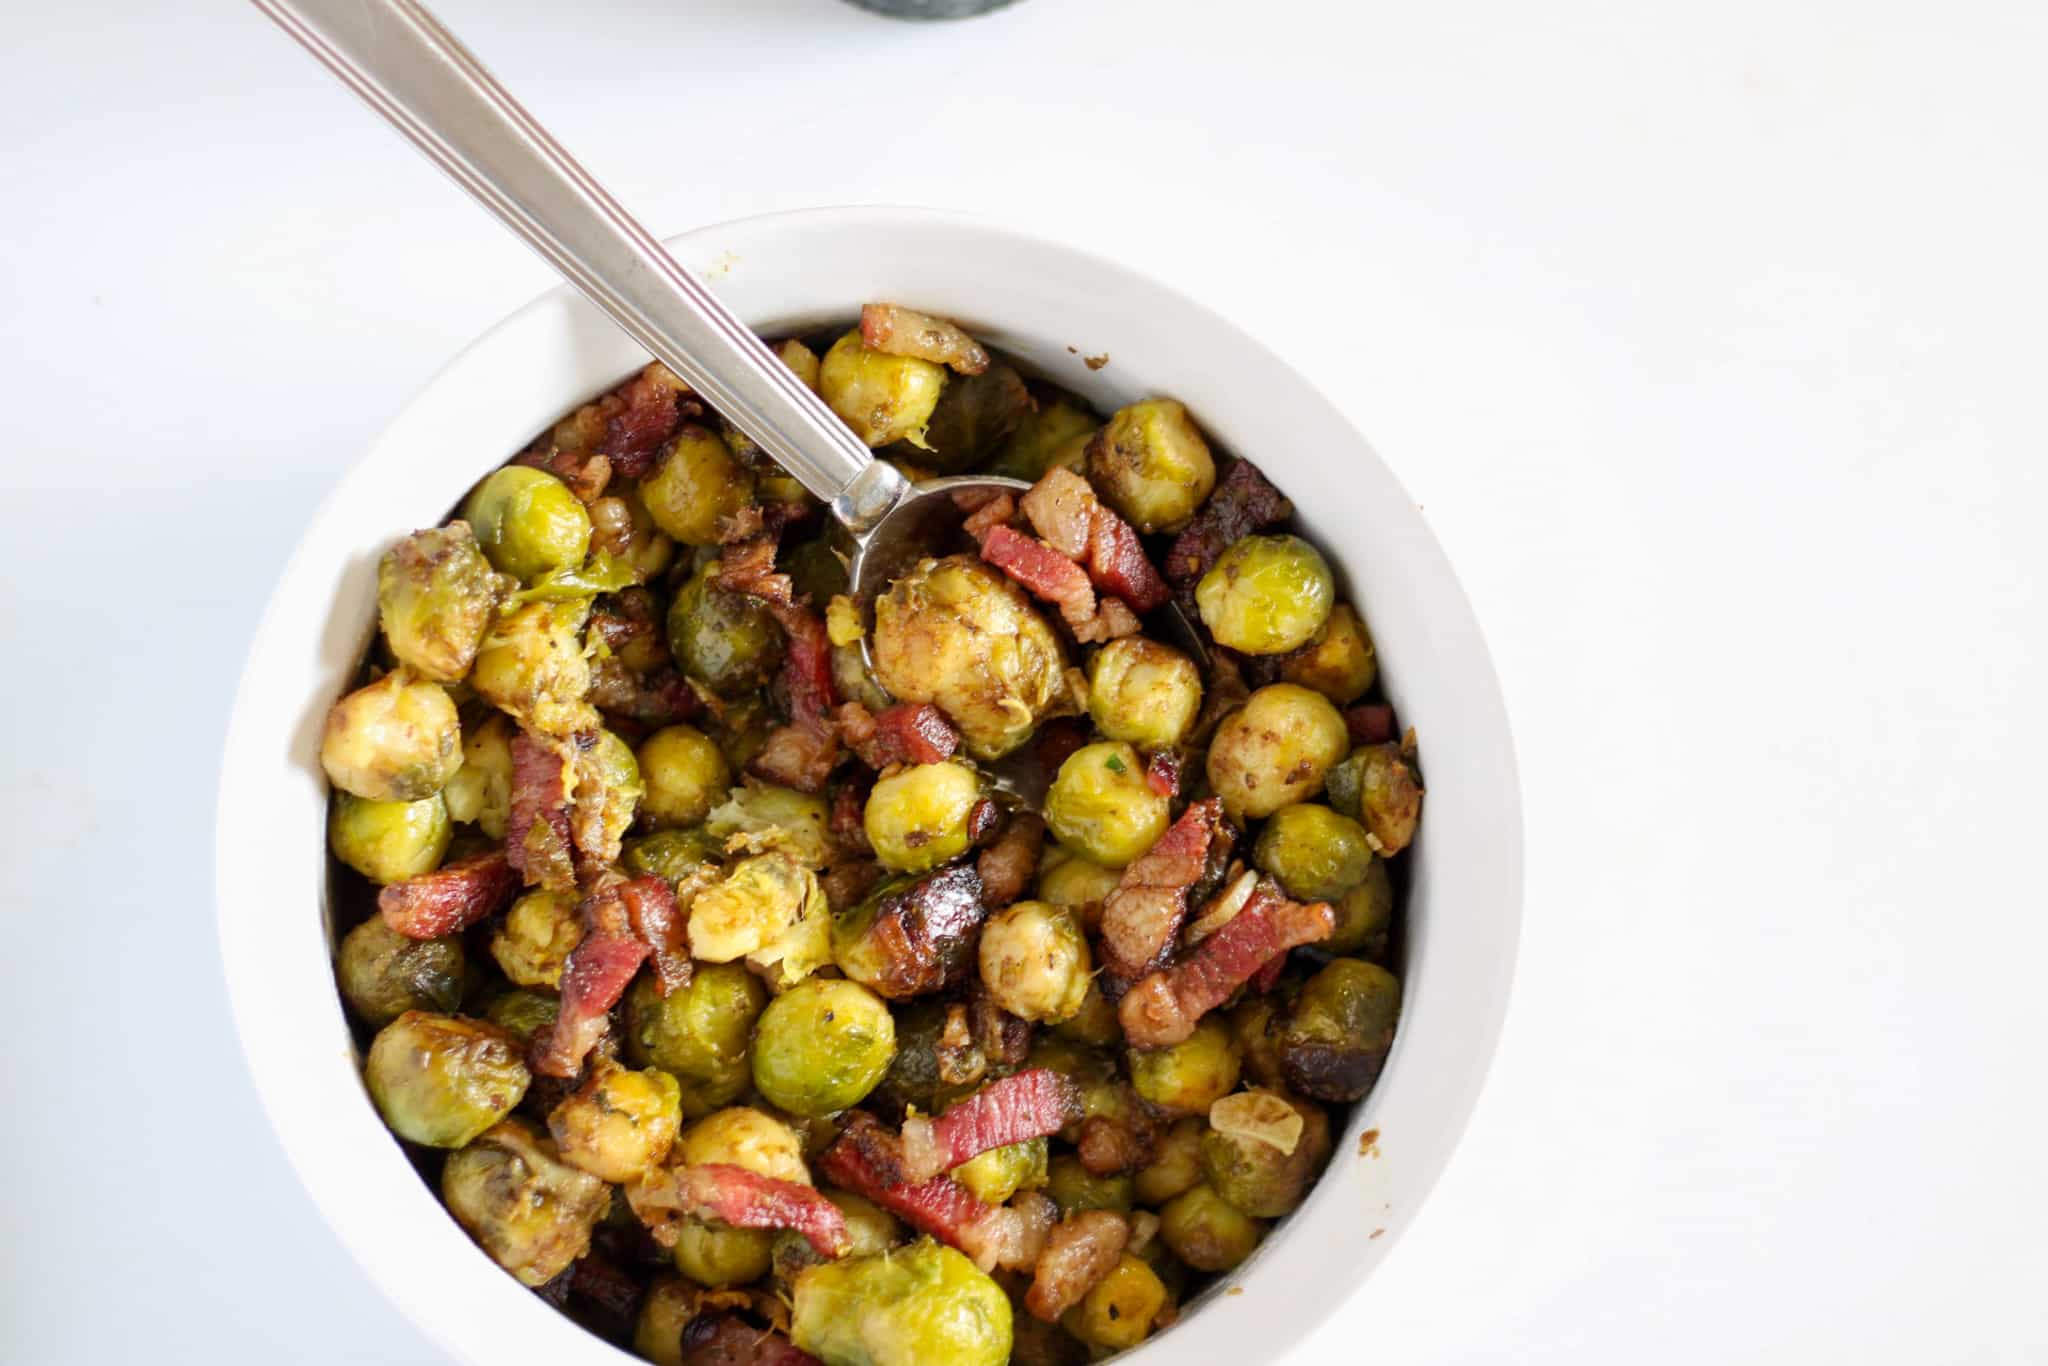 roasted brussels sprouts in bowl